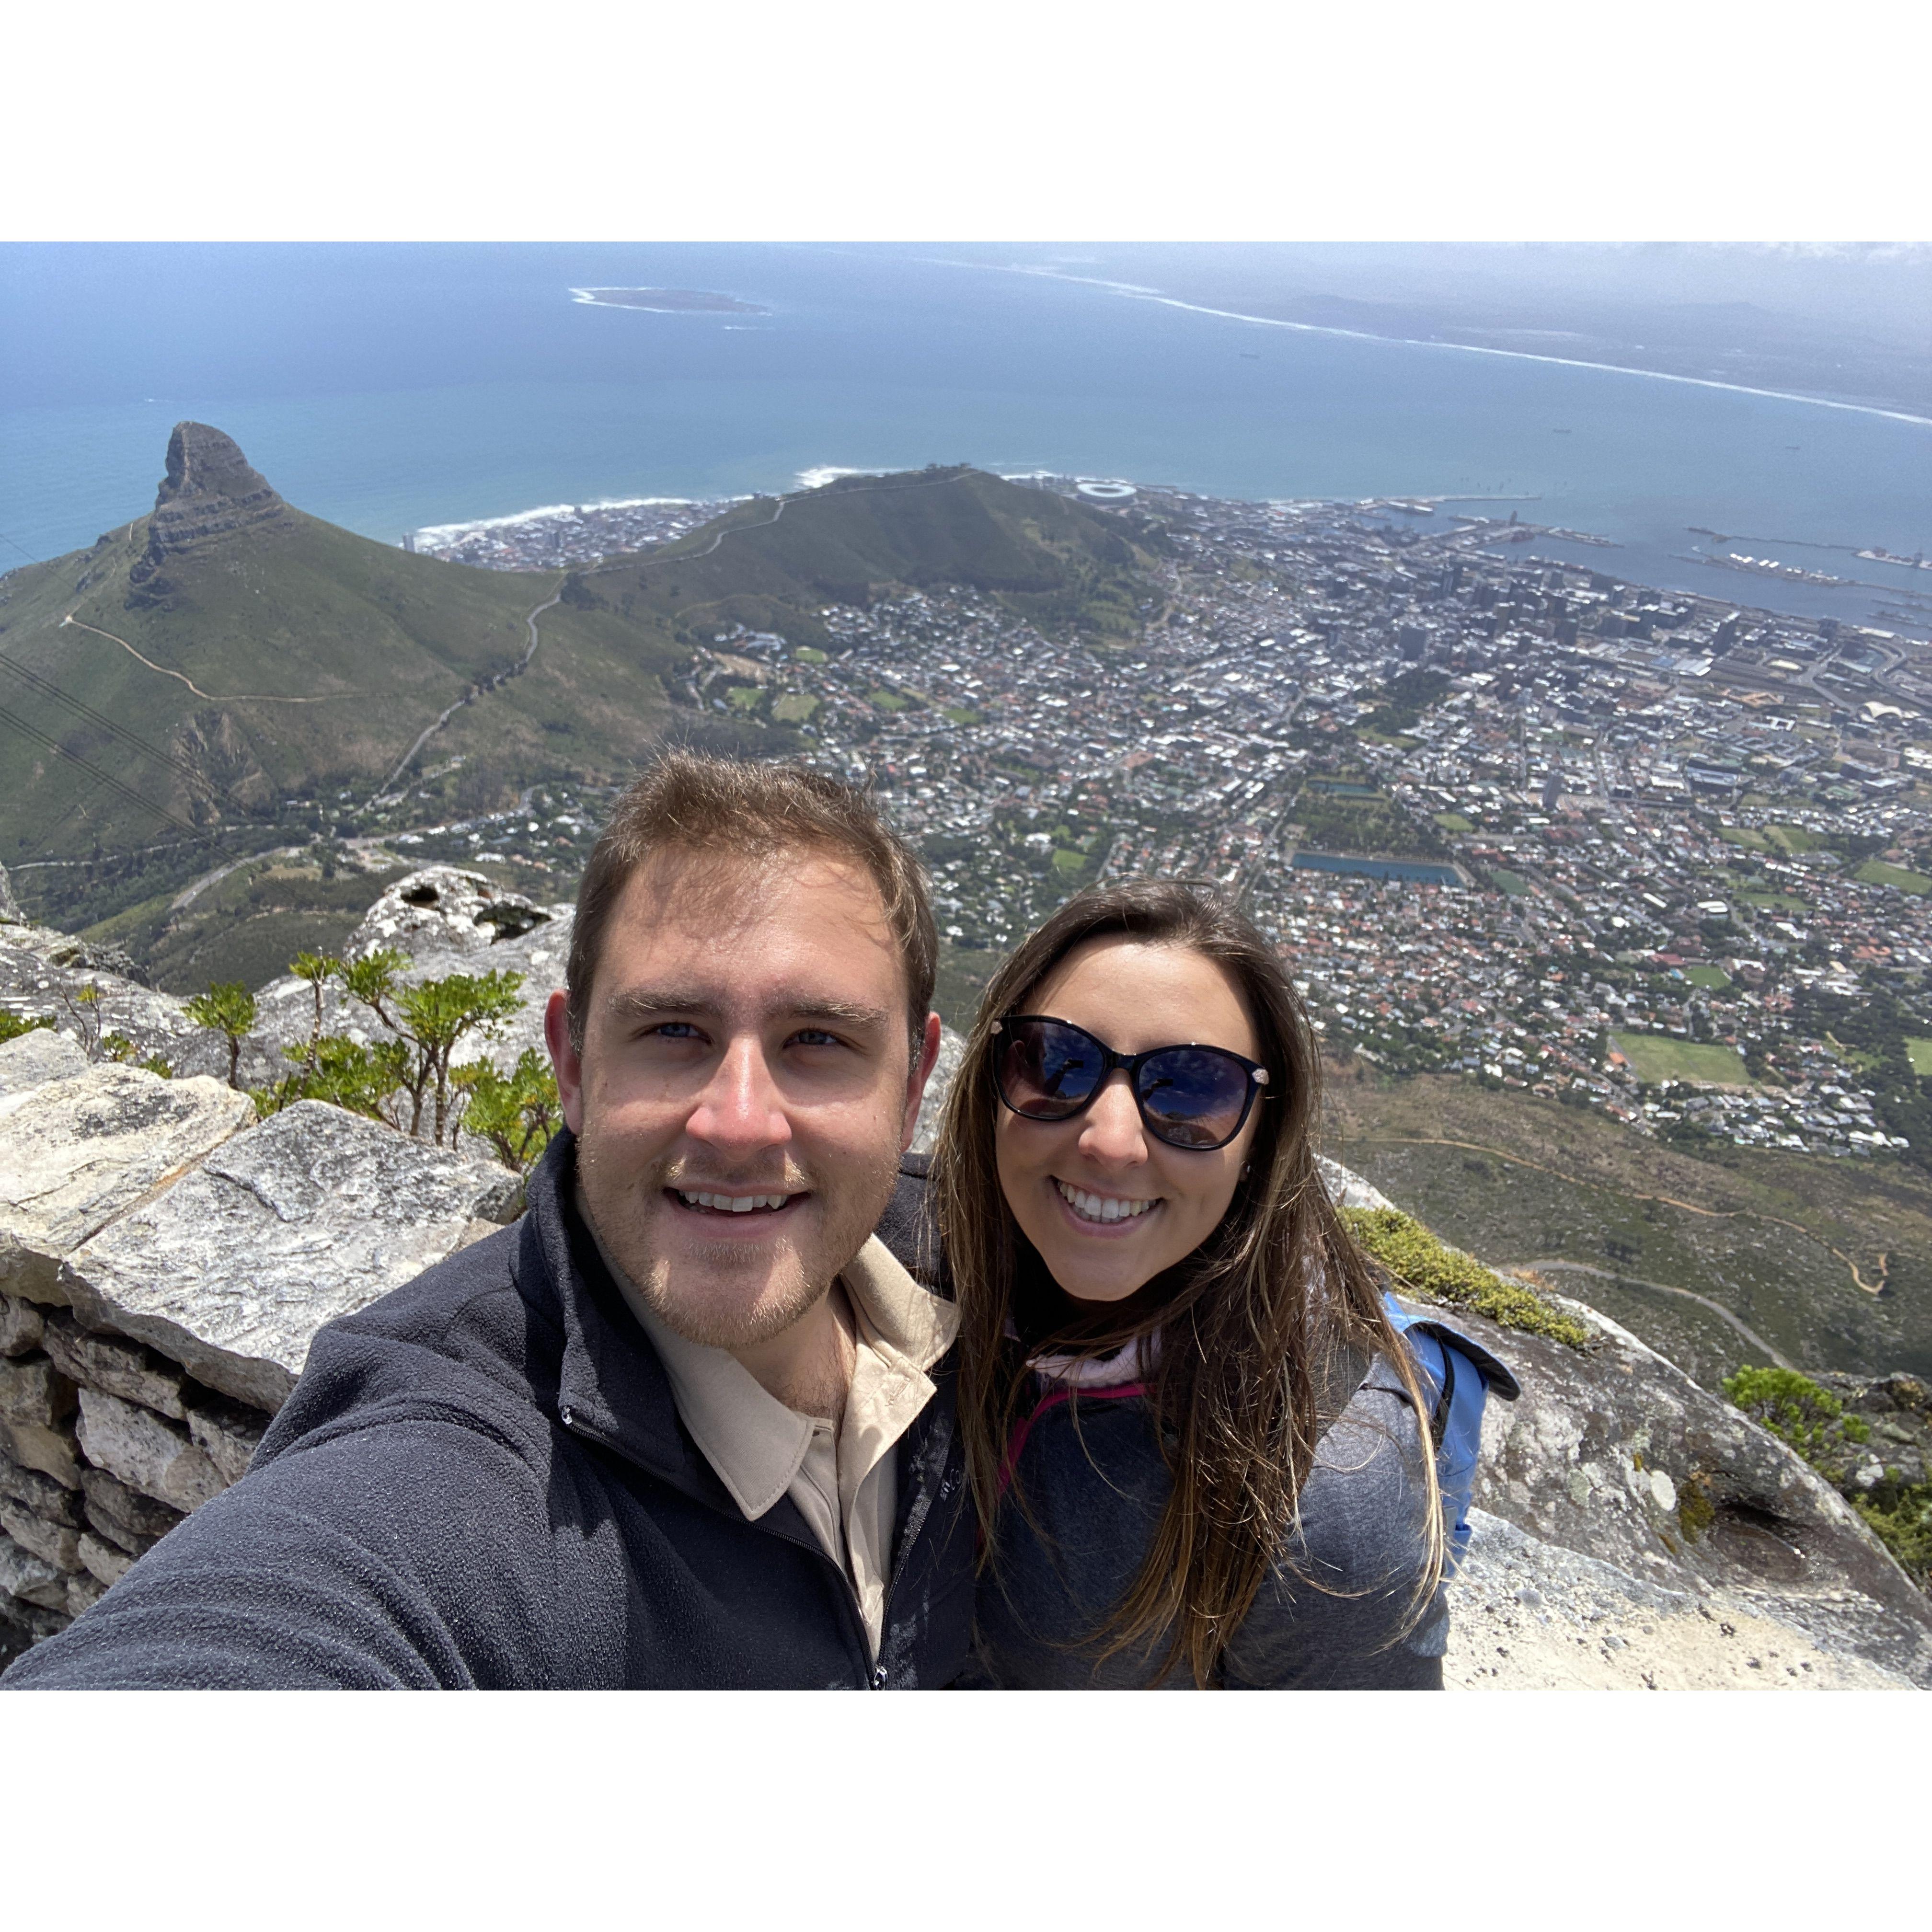 The couple made it to the top of Table Mountain in Cape Town, South Africa! They were lucky enough for the clouds to clear so they could see for miles and miles - a rare sight for most SA travelers!